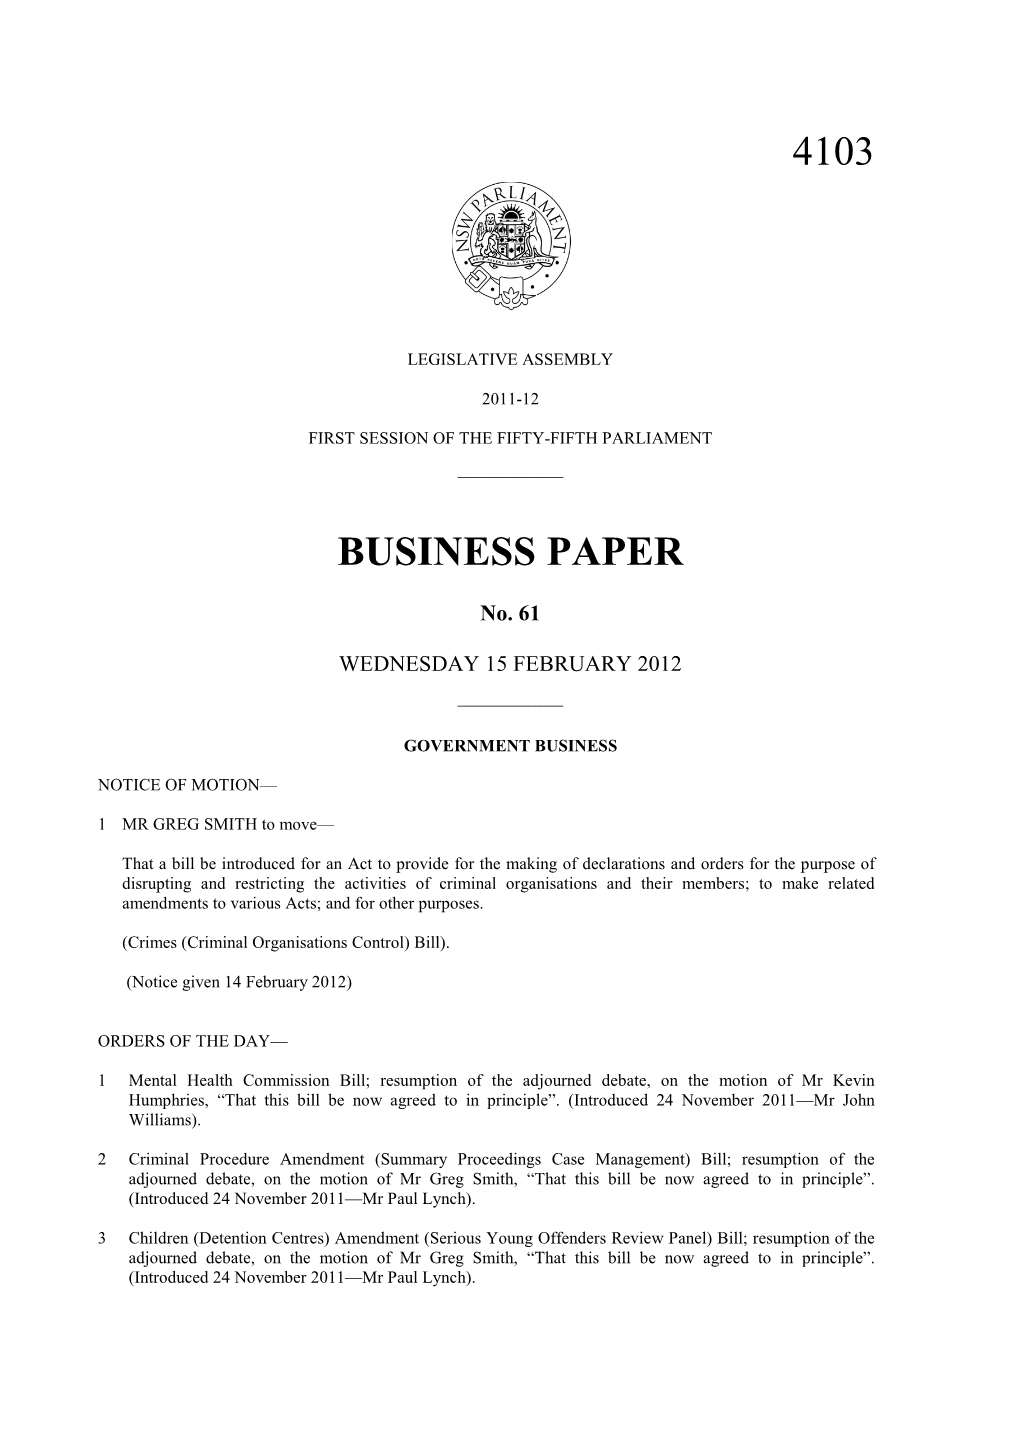 4103 Business Paper